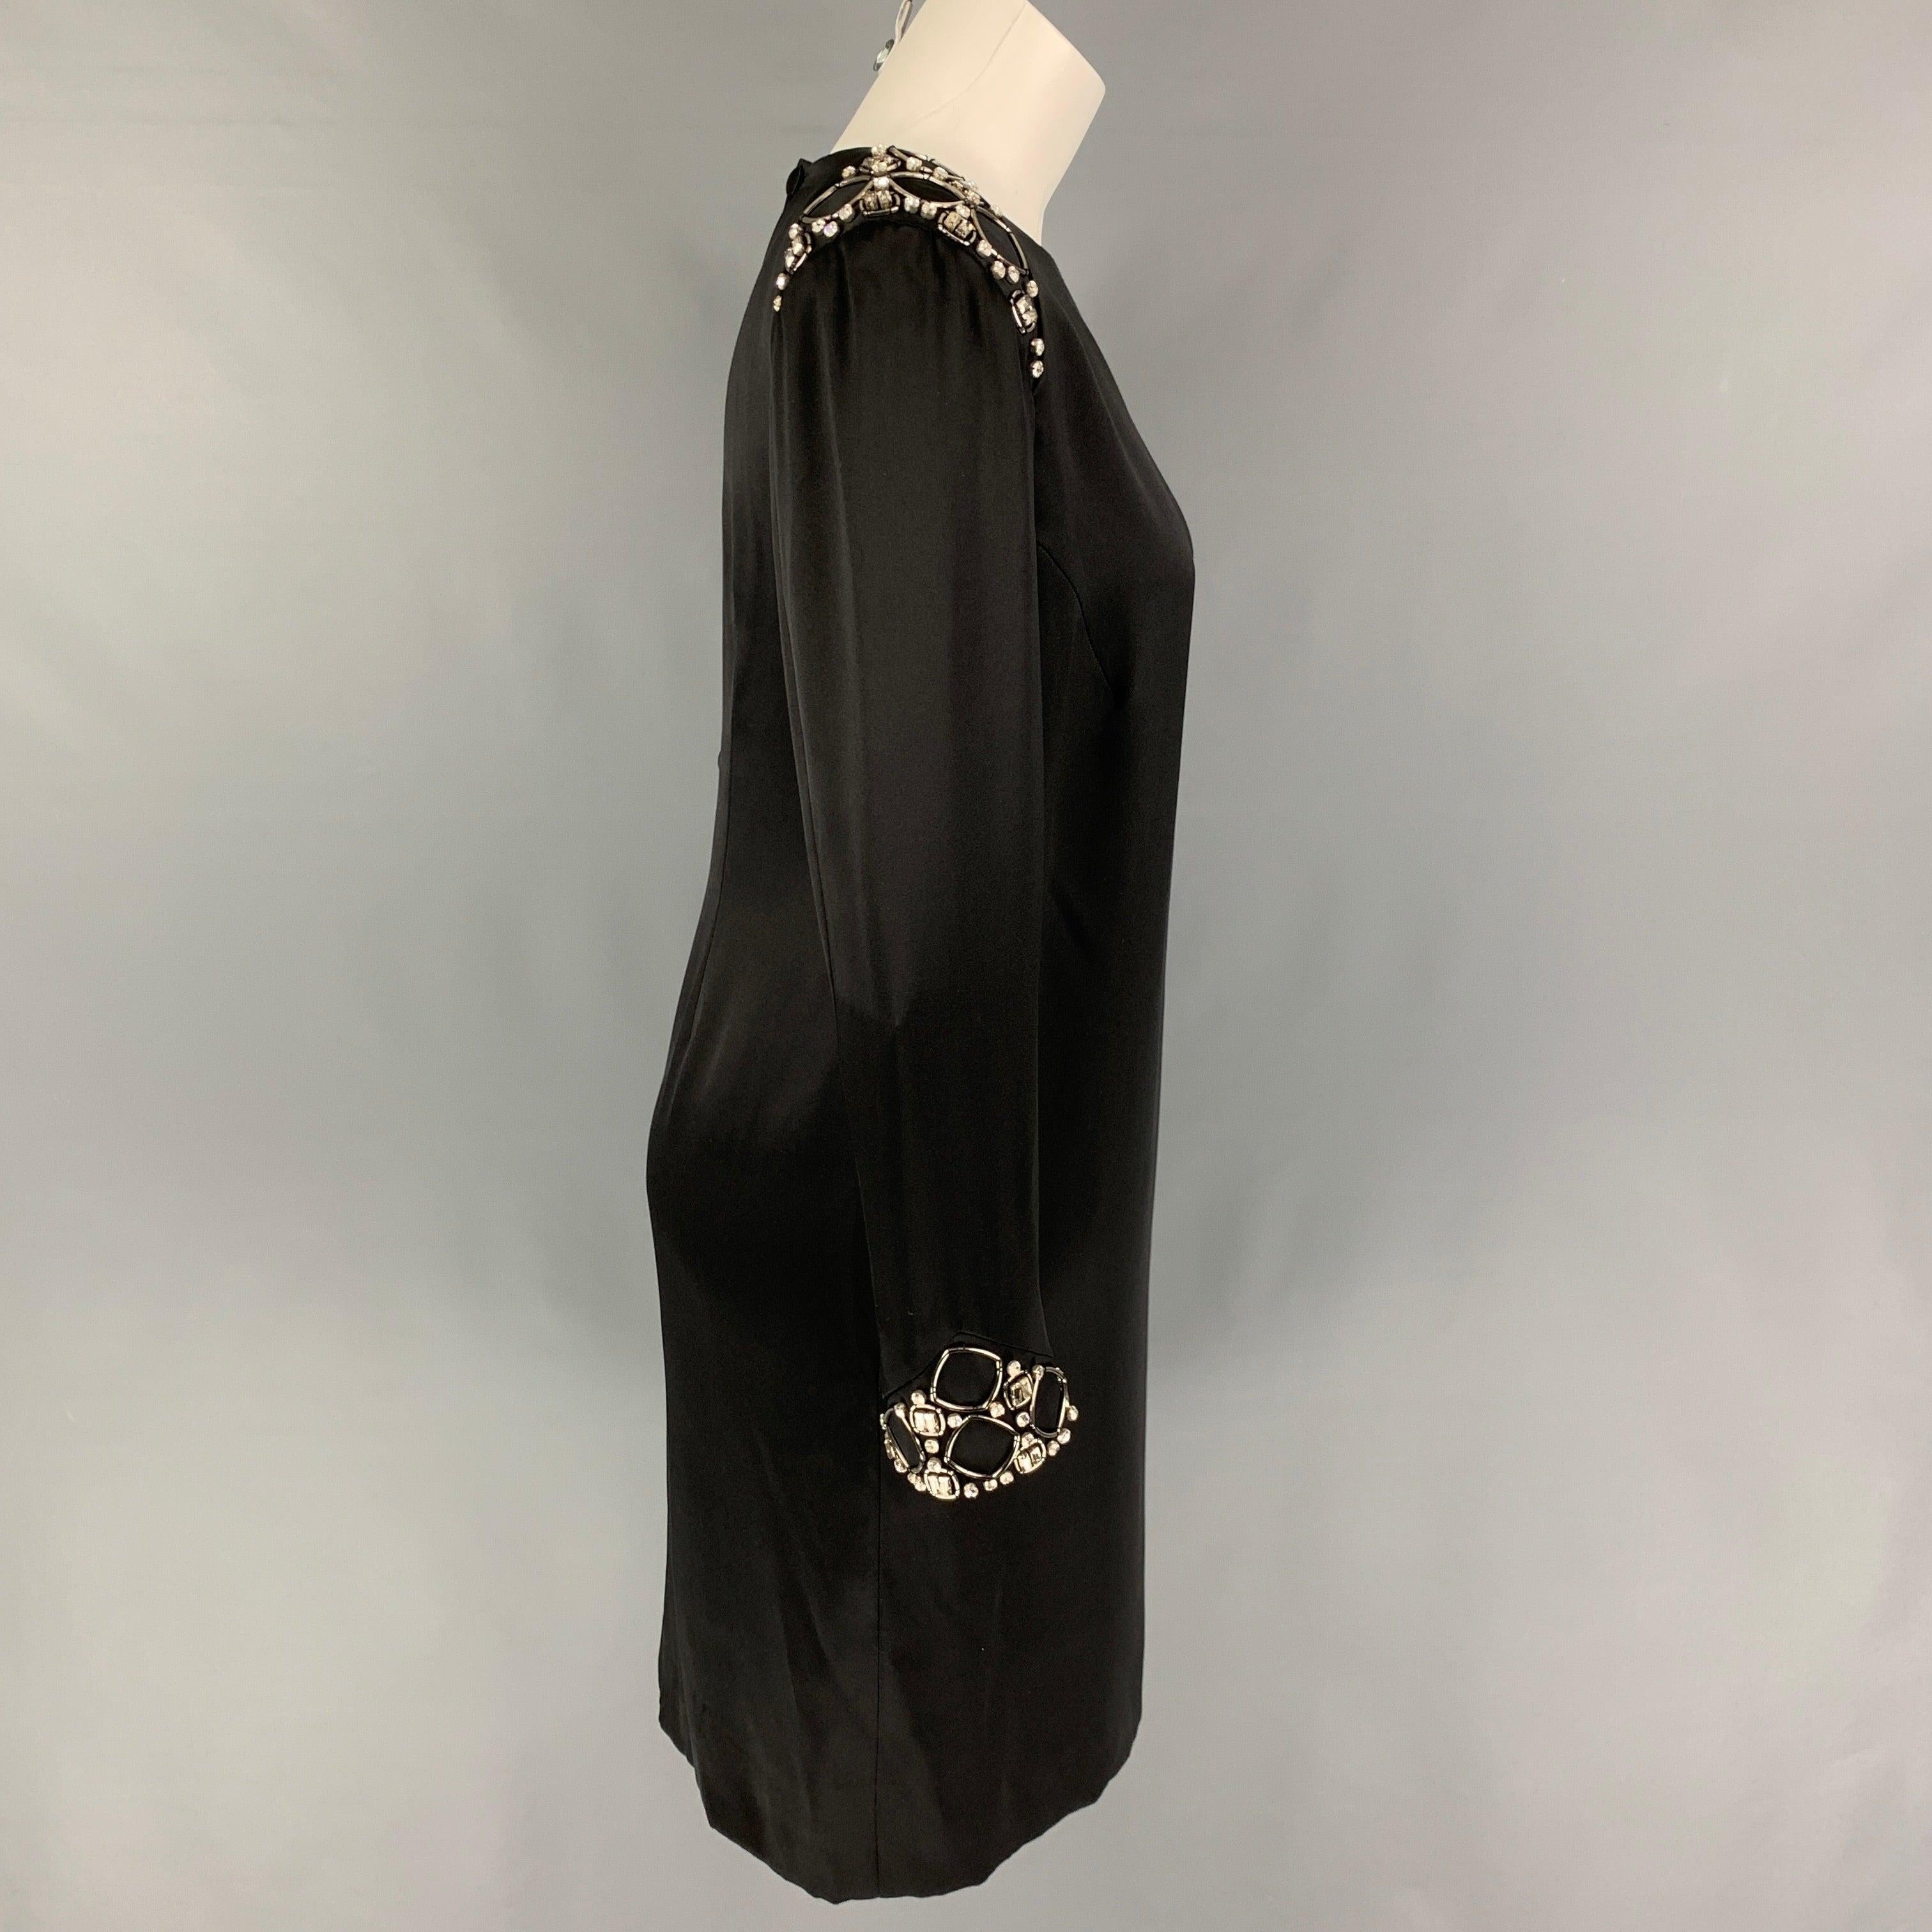 GIORGIO ARMANI dress comes in a black silk featuring a sheath style, crystal embellishments, slit pockets, shoulder pads, and a back buttoned closure. Made in Italy.
Very Good
Pre-Owned Condition. 

Marked:   42 

Measurements: 
 
Shoulder: 16